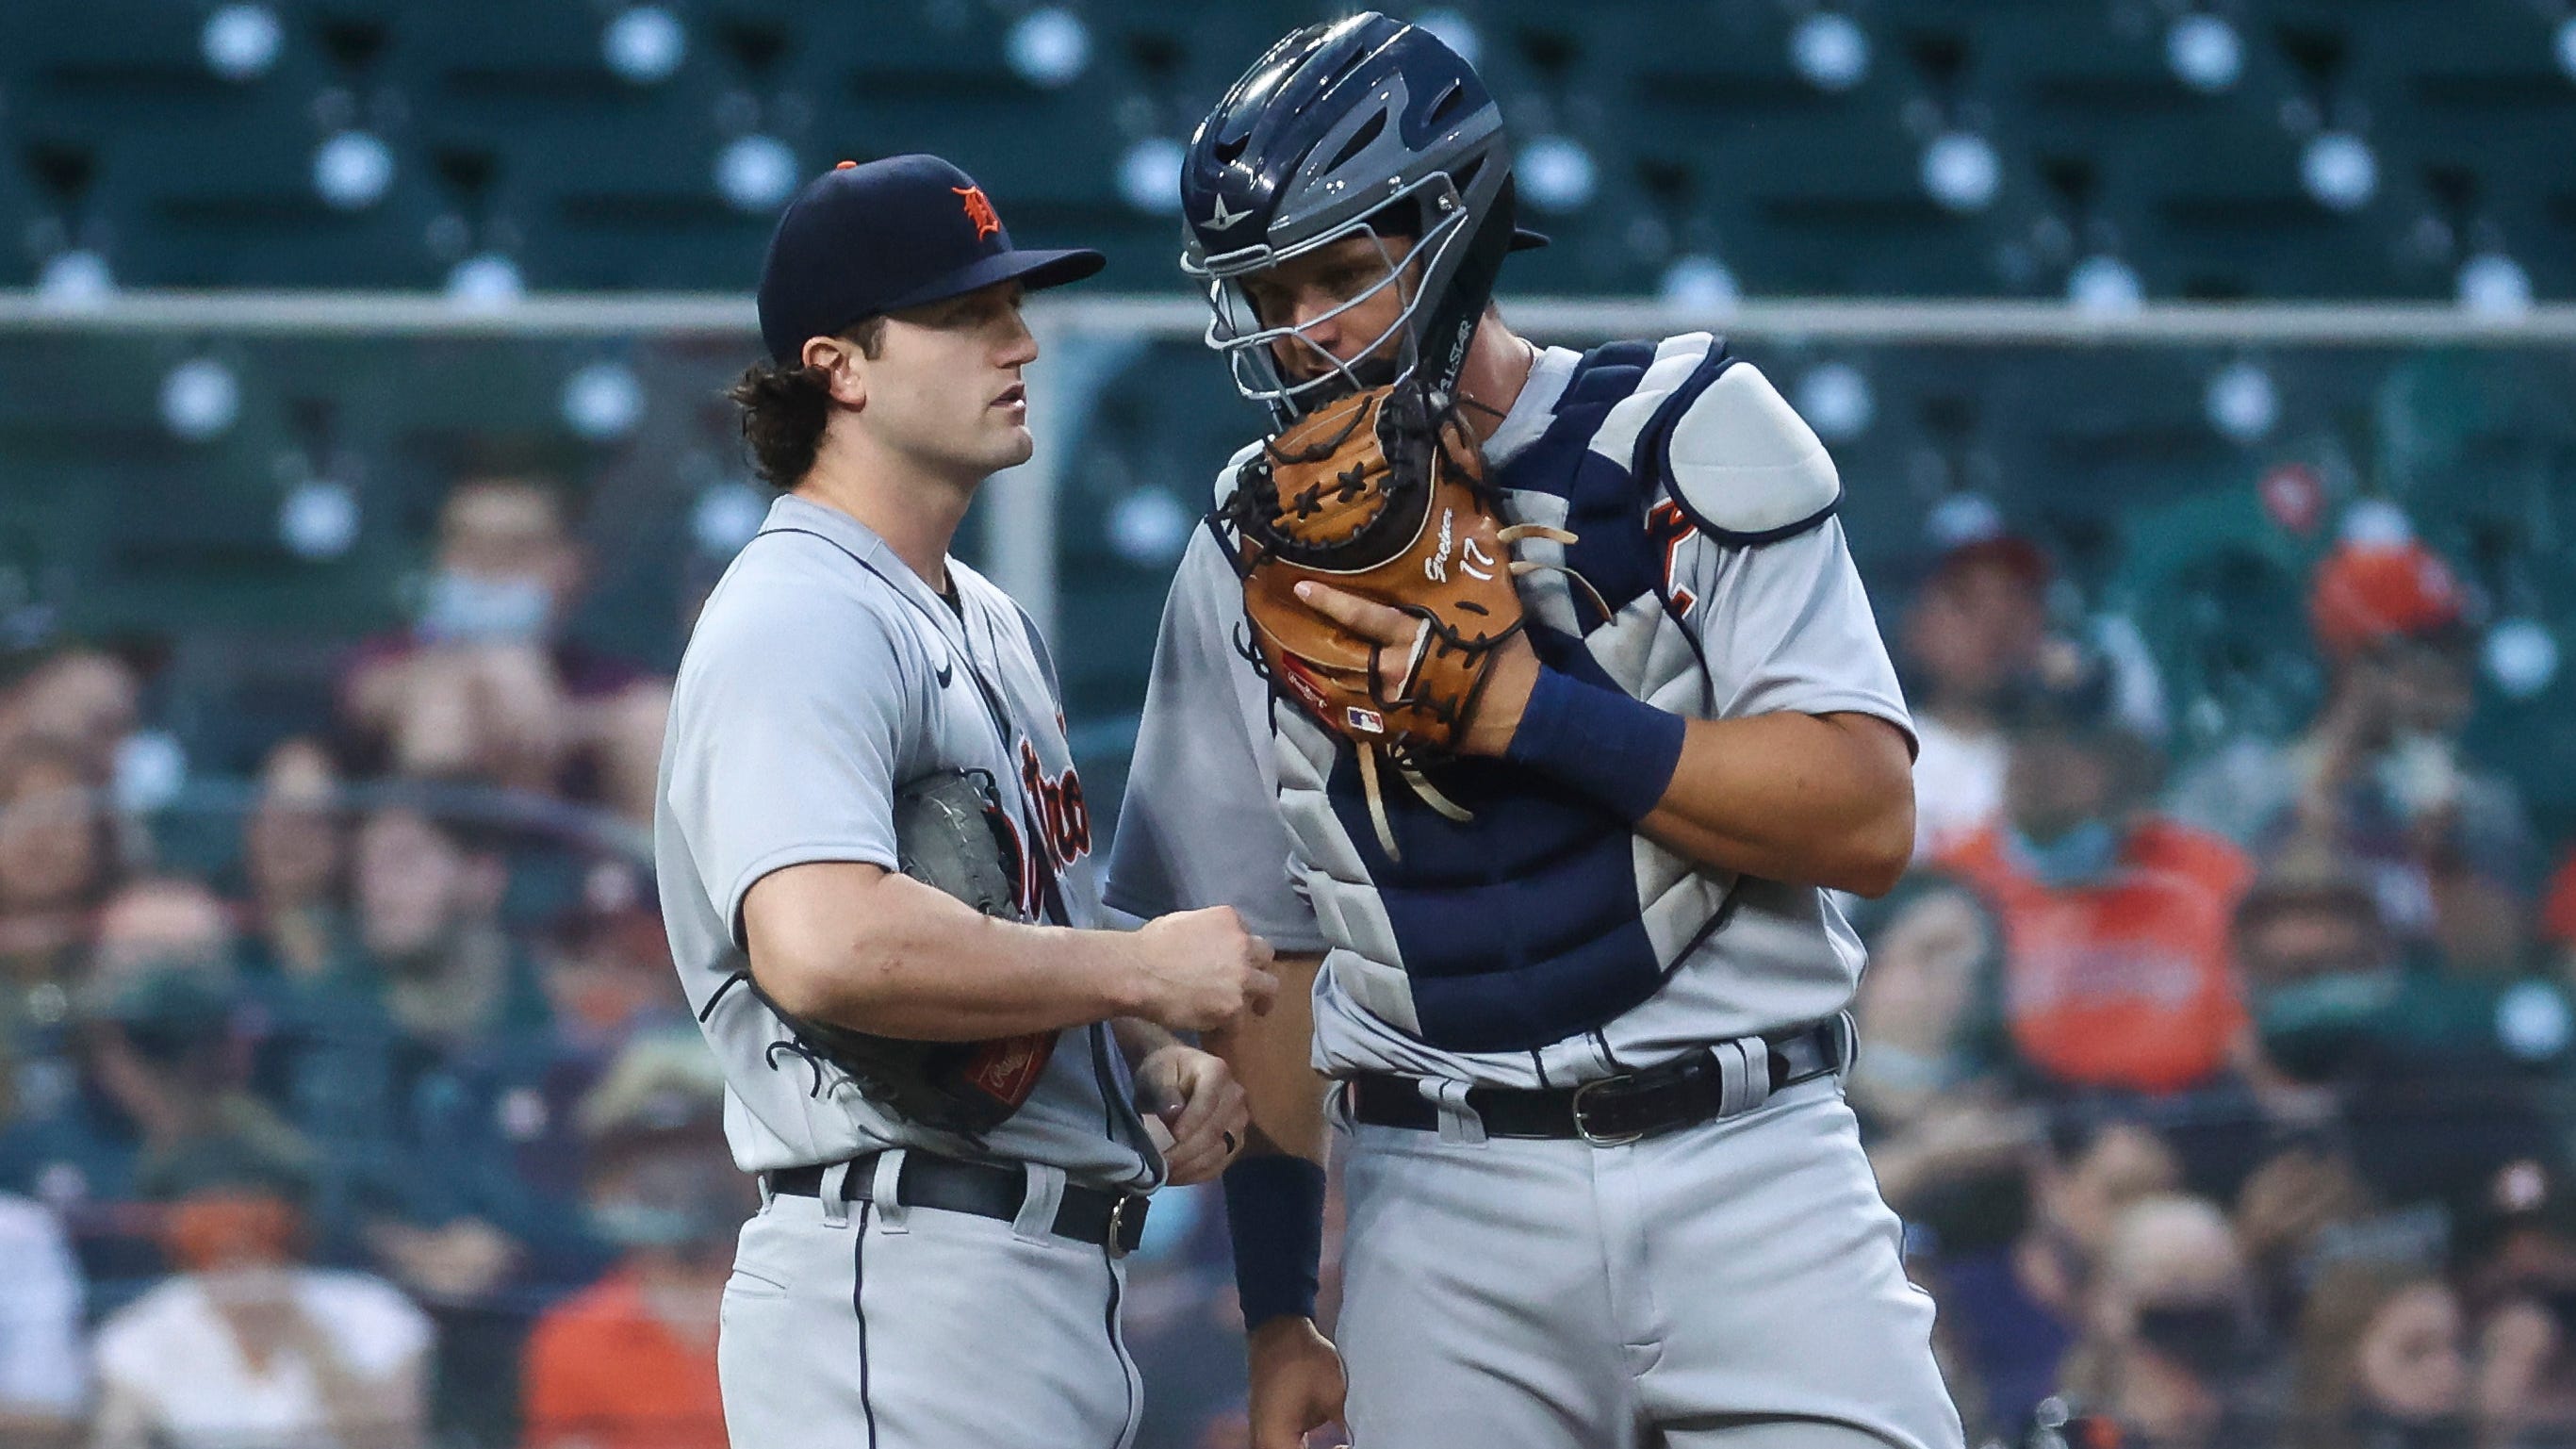 Detroit Tigers starting pitcher Casey Mize (12) and catcher Grayson Greiner (17) talk on the mound during the first inning against the Houston Astros April 12, 2021 at Minute Maid Park.